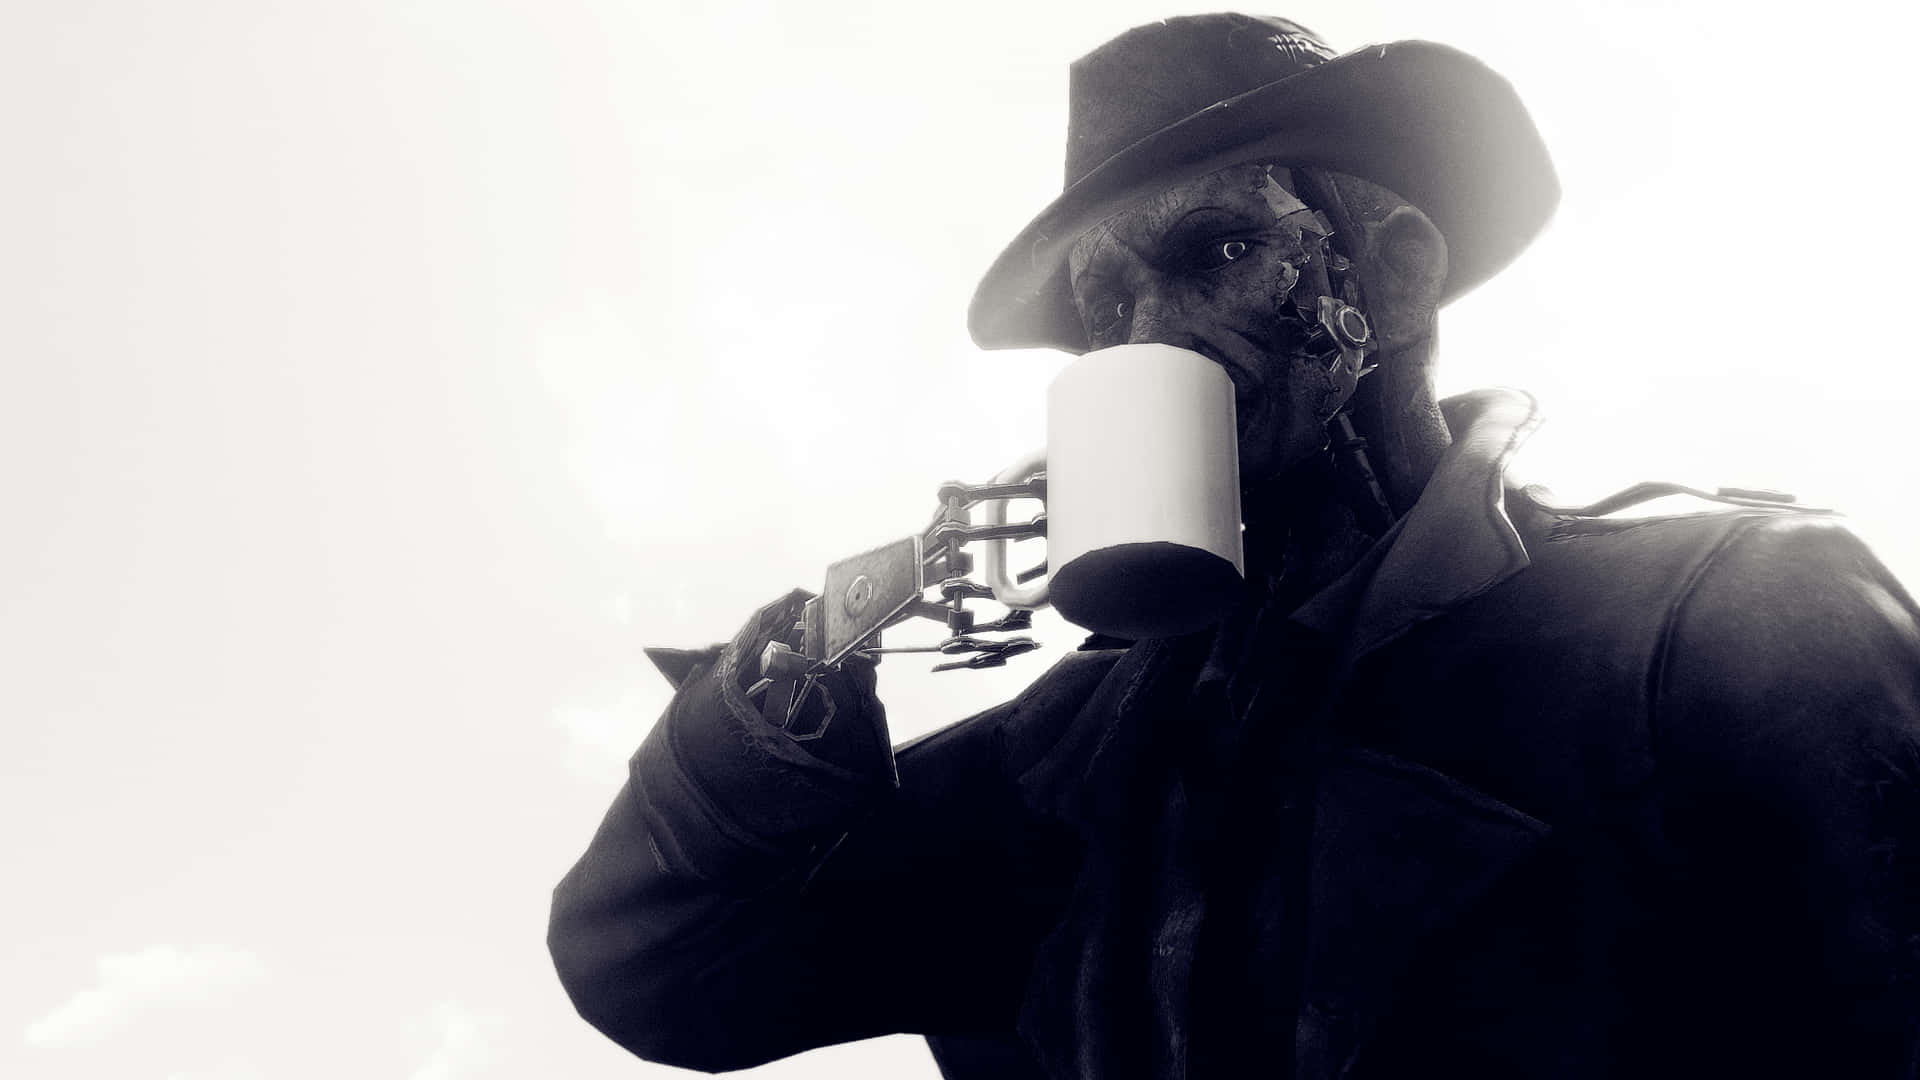 "The Iconic Detective, Nick Valentine, in Action" Wallpaper